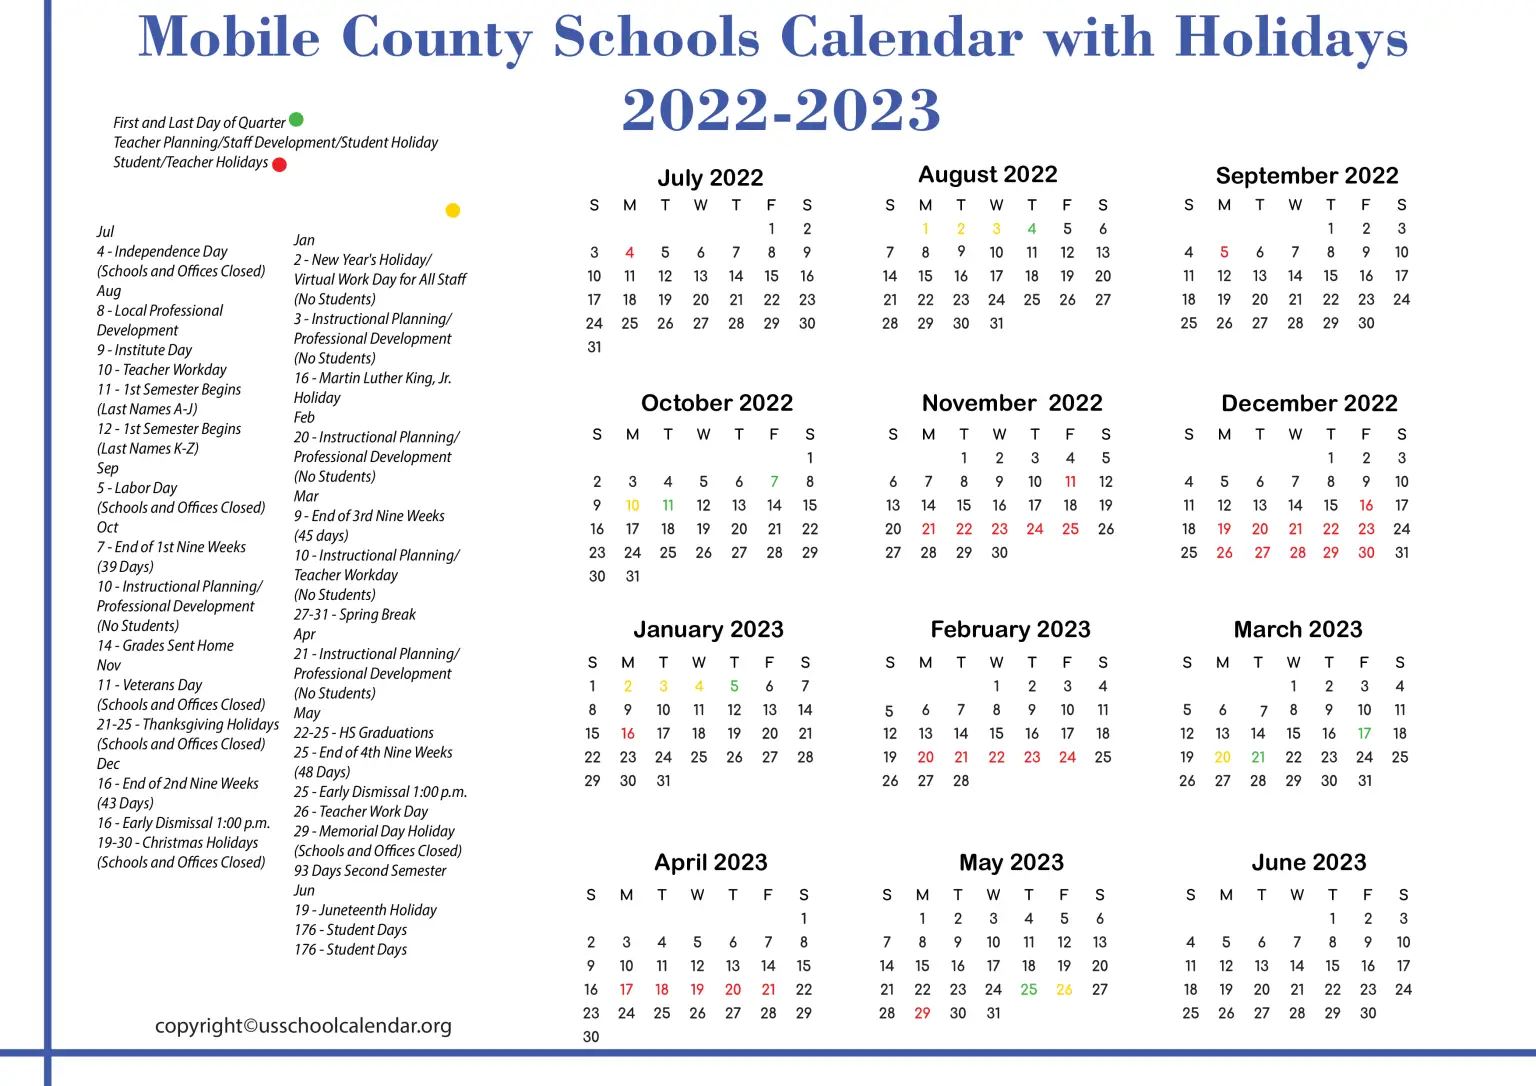 [MCPSS] Mobile County Schools Calendar with Holidays 2023